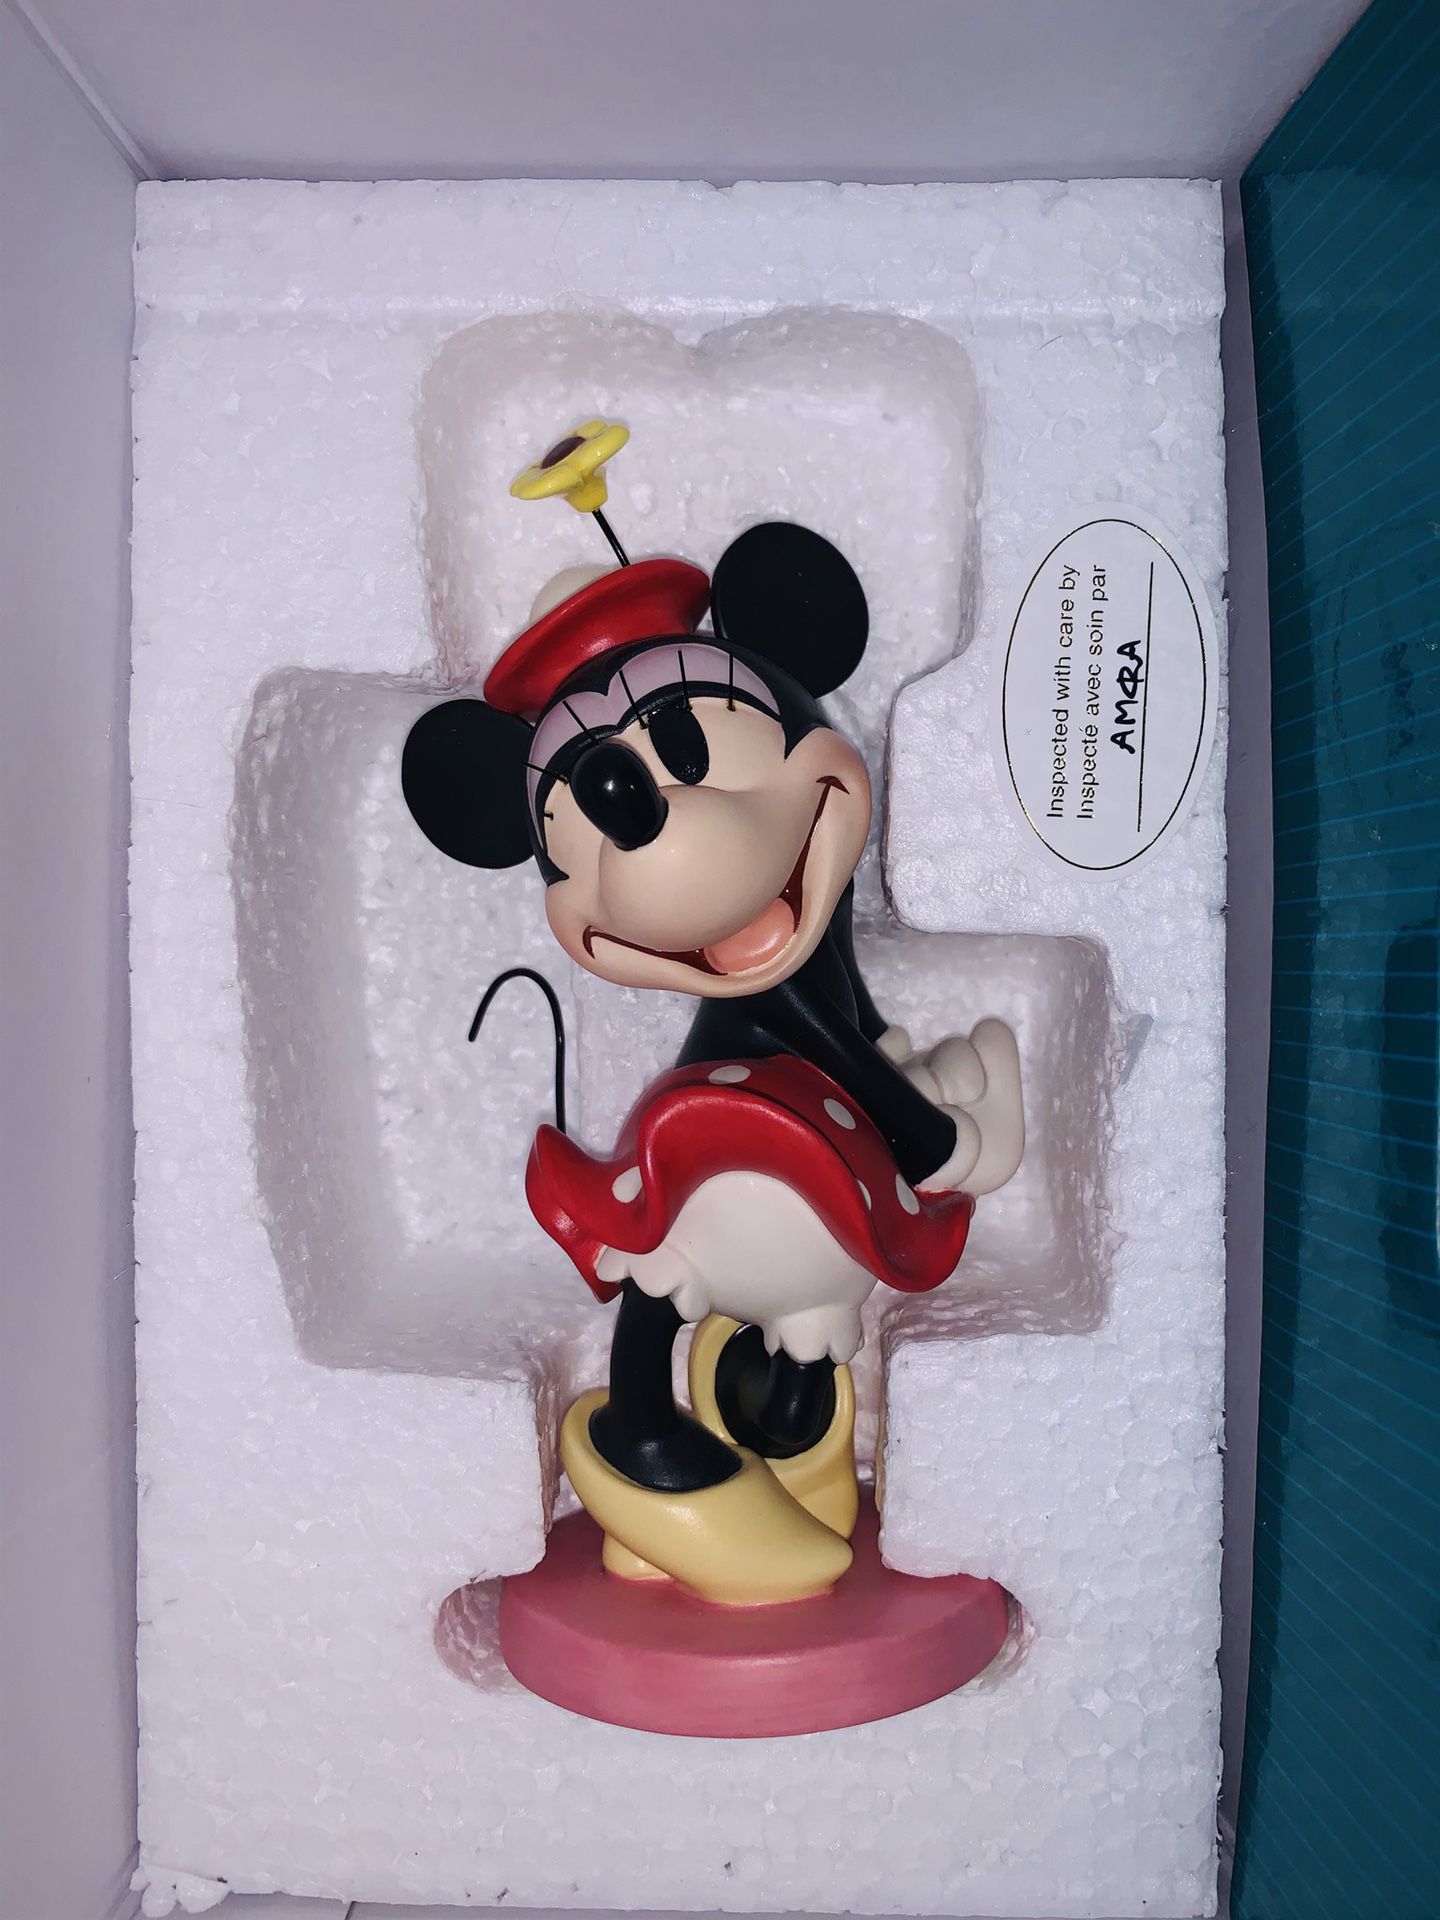 Walt Disney Collectors Society Minnie Mouse "A Real Sweetheart" Figurine